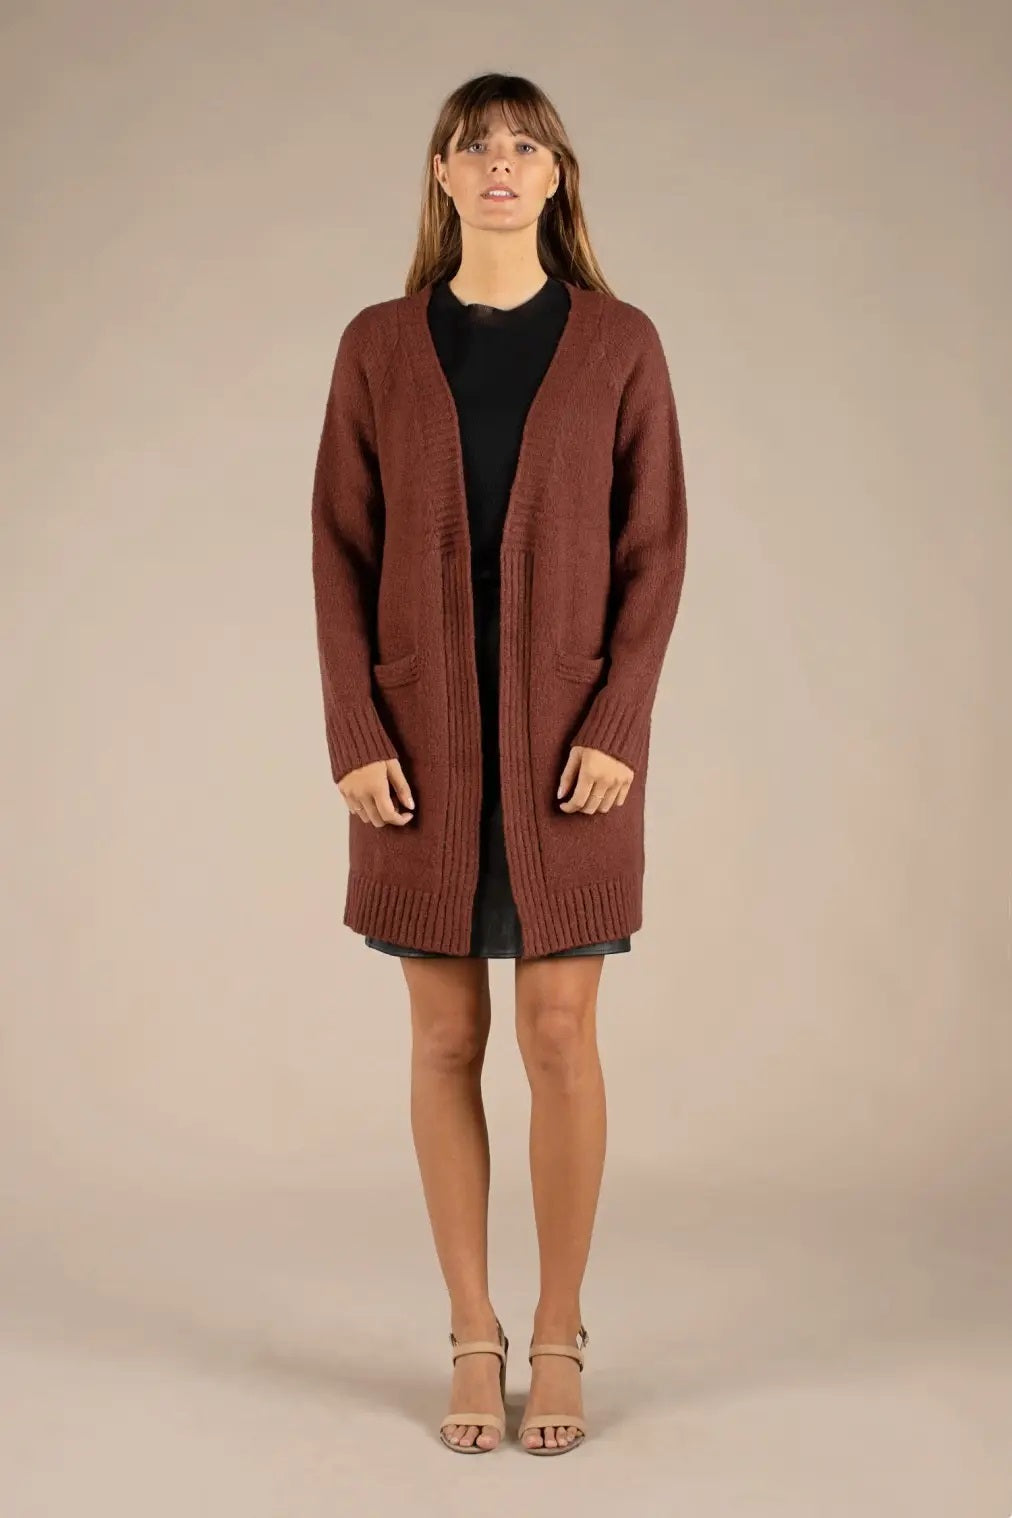 all:row, The Rayna Cardigan Sweater in Dark Brown - Boutique Dandelion